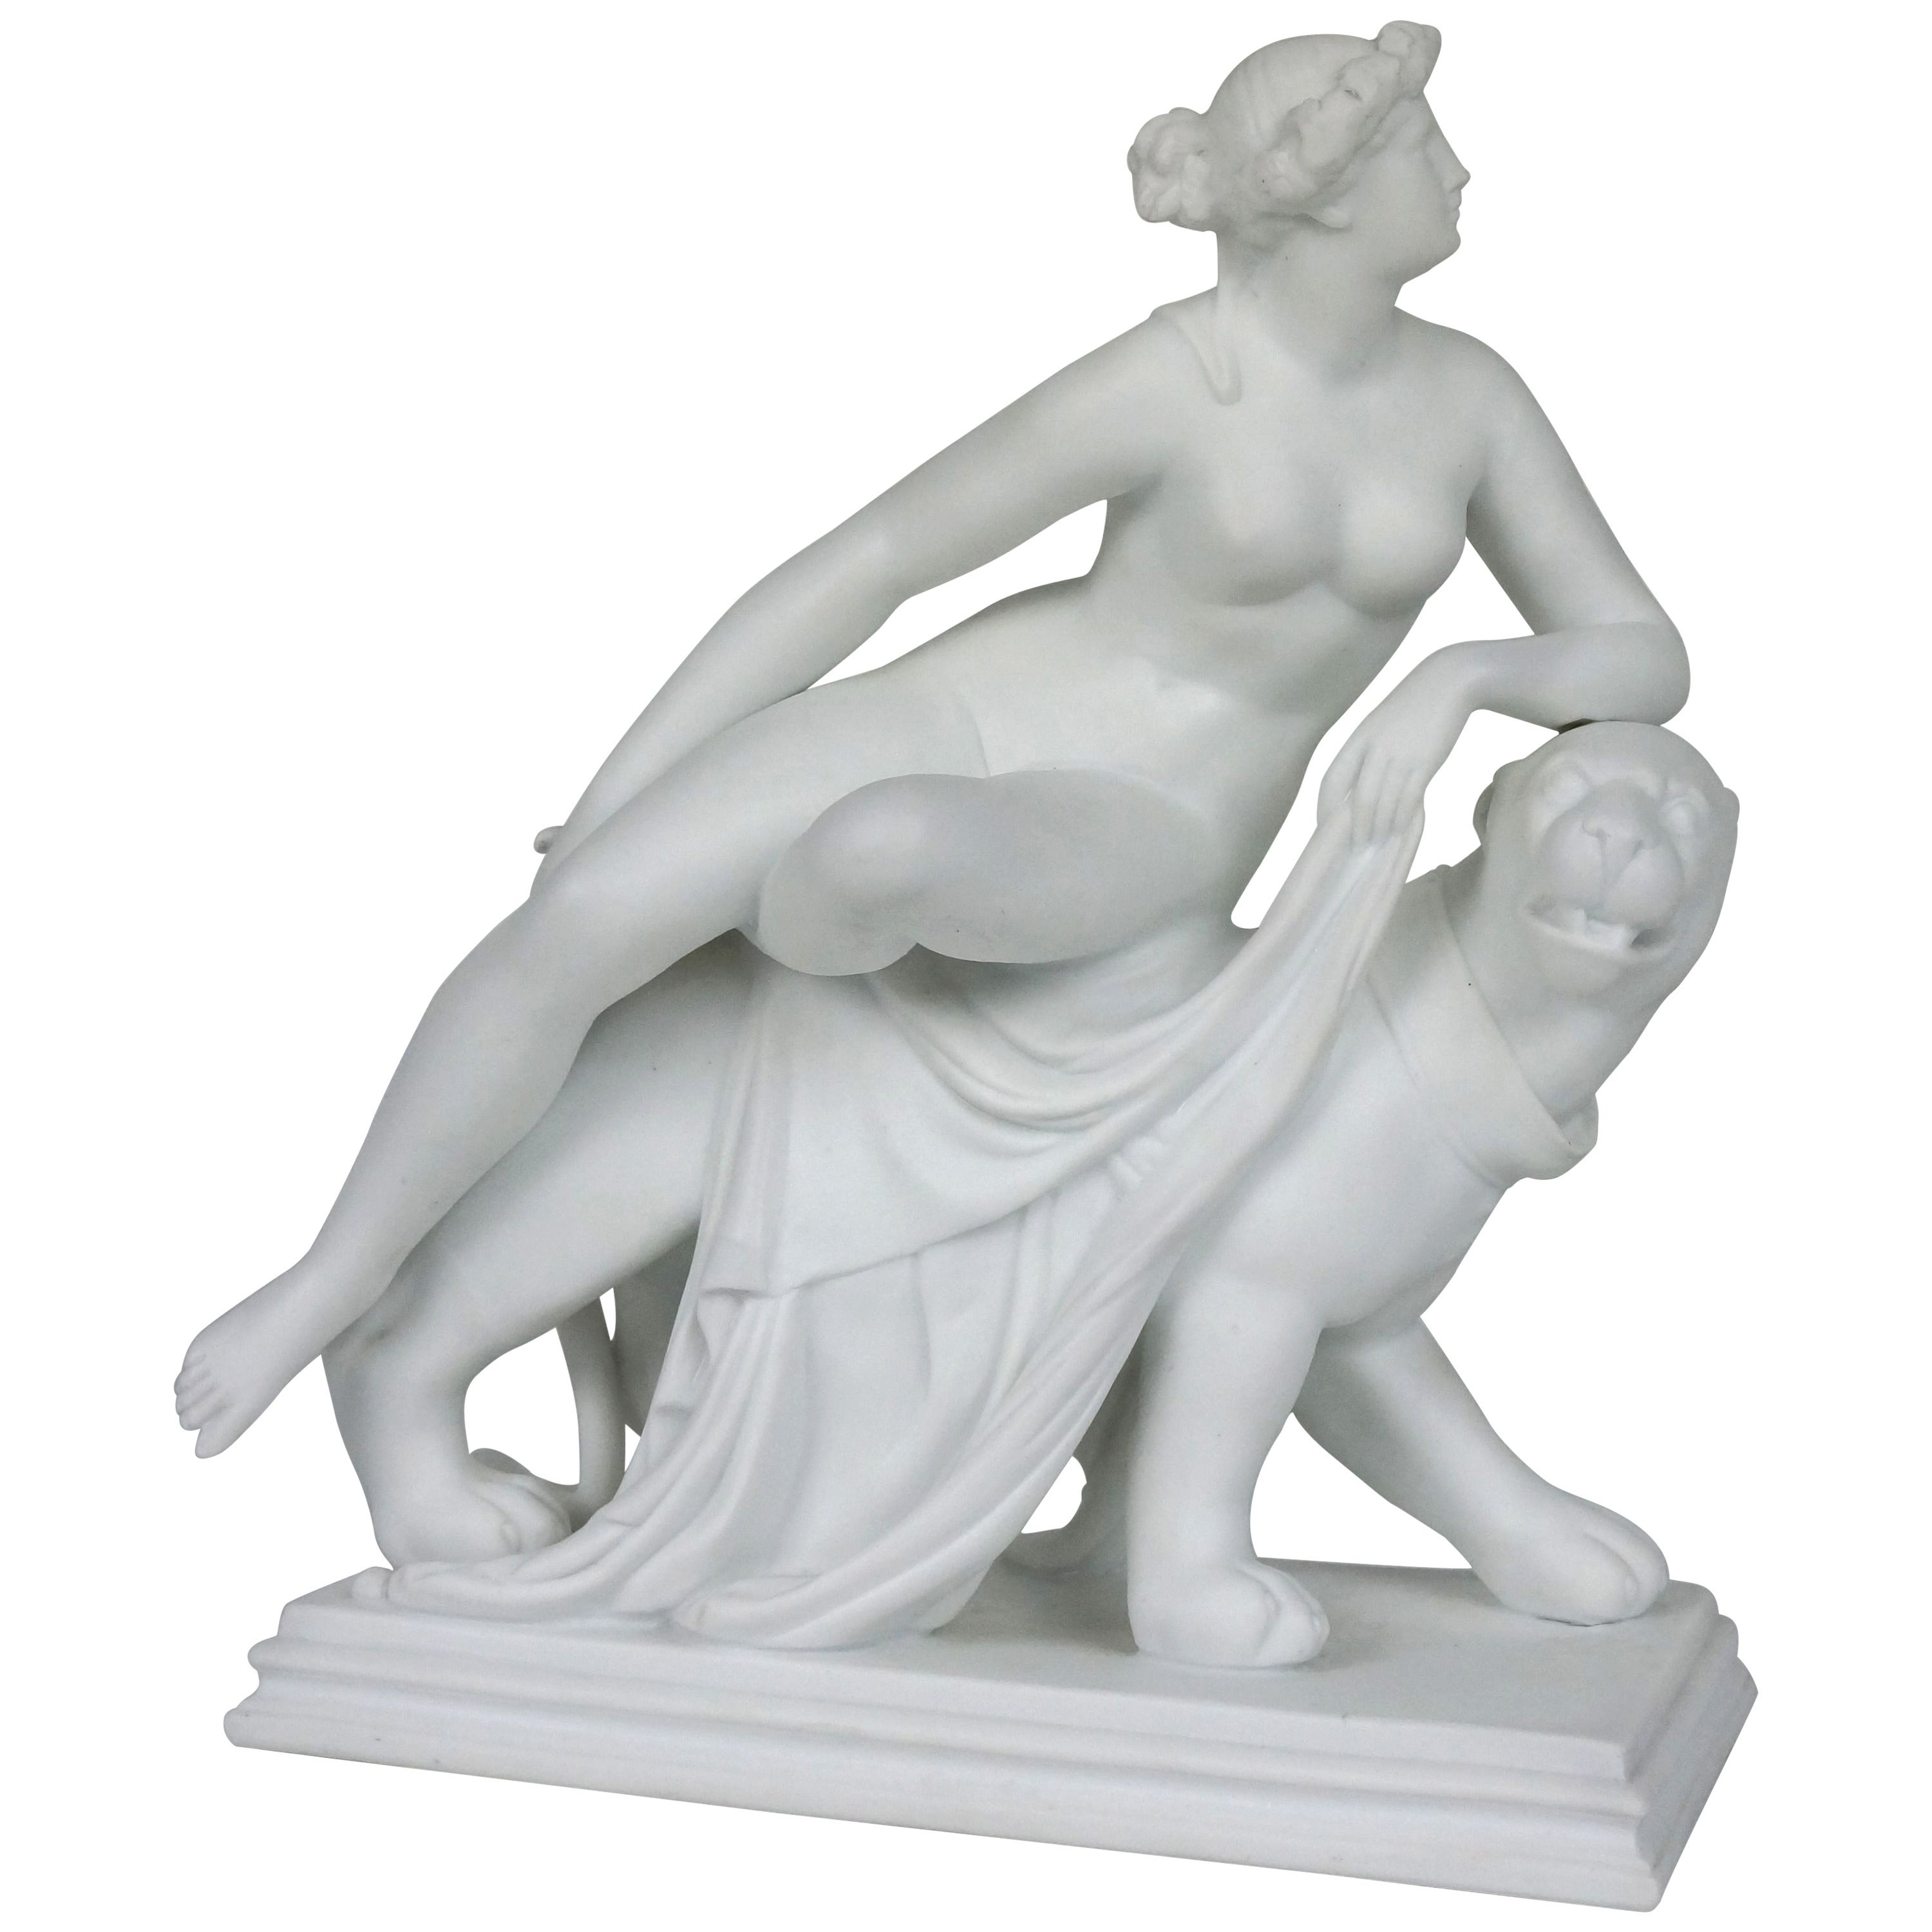 Parian-Ware Figurine Titled "Ariadne on a Panther, " Minton & Co., England